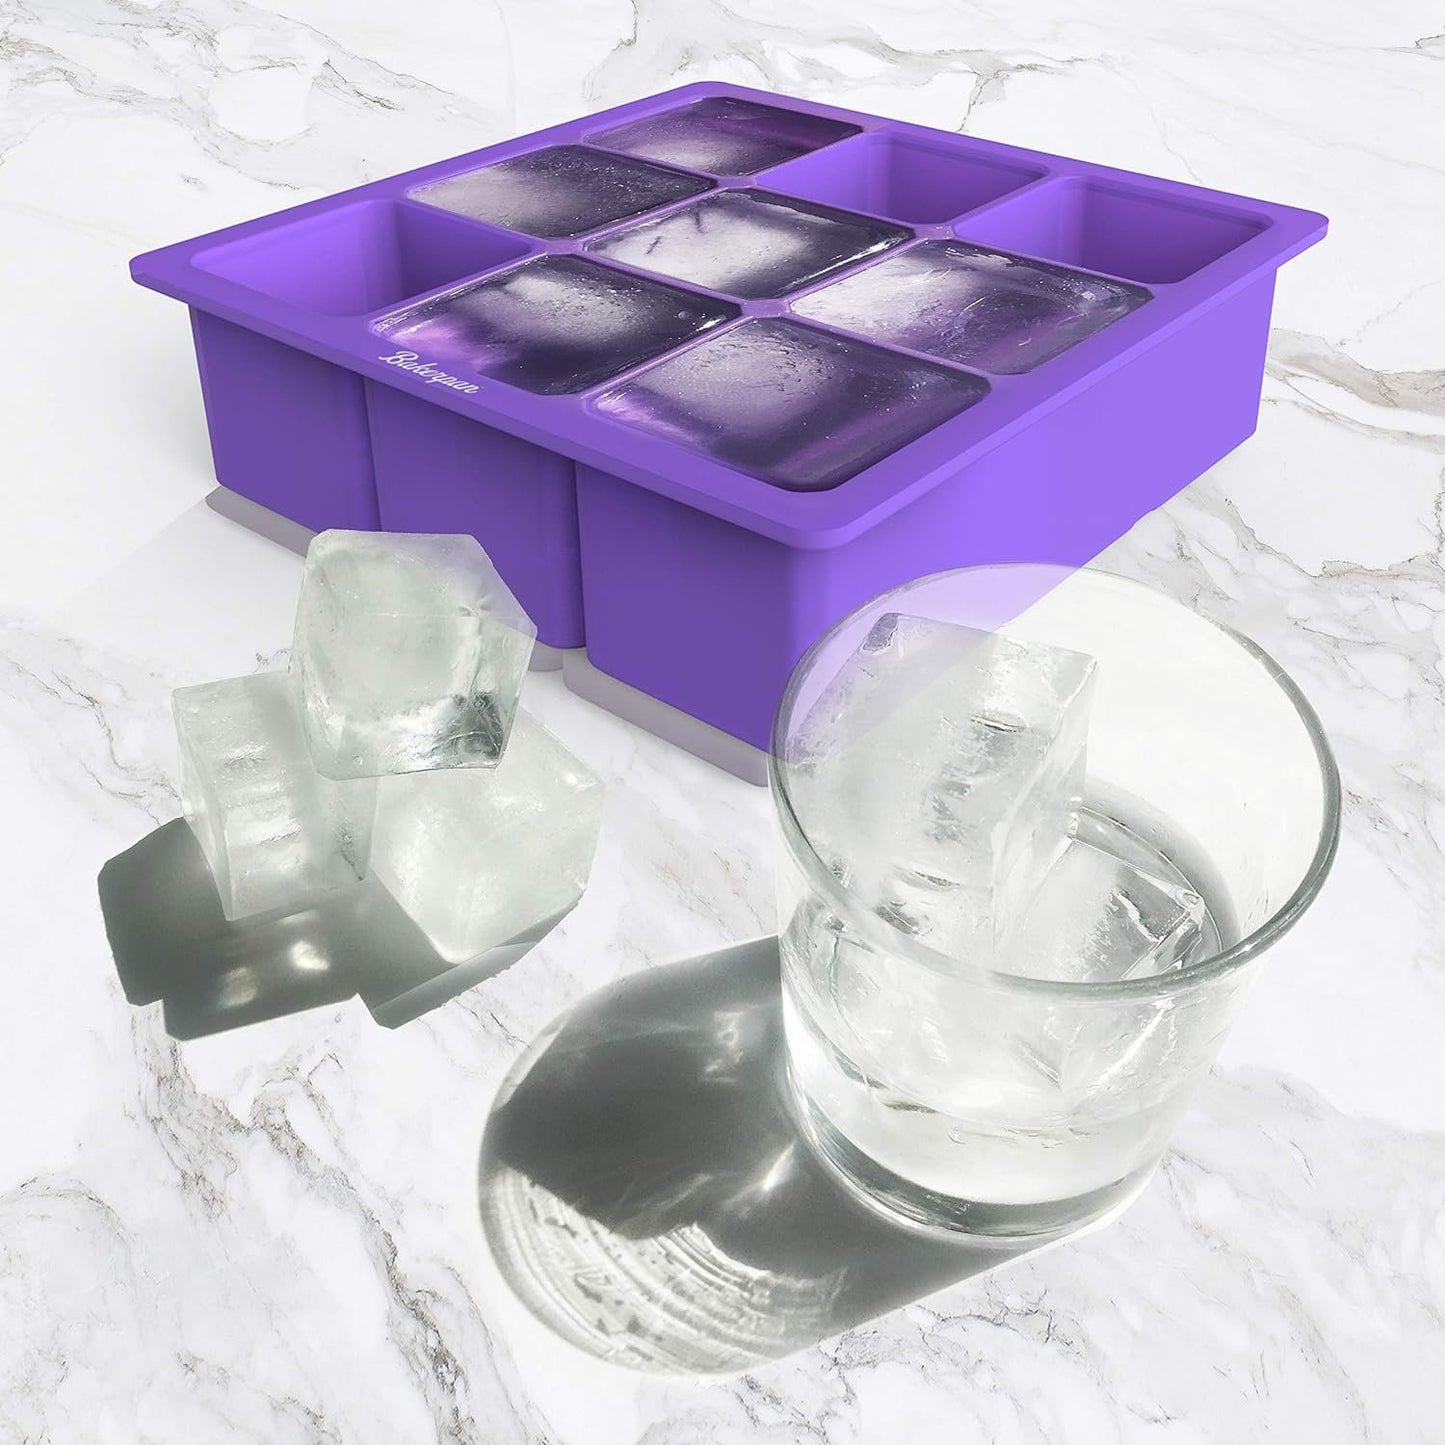 Bakerpan Silicone Ice Cube Tray, Ice Cube Mold for Whiskey, Cocktails - Set of 2